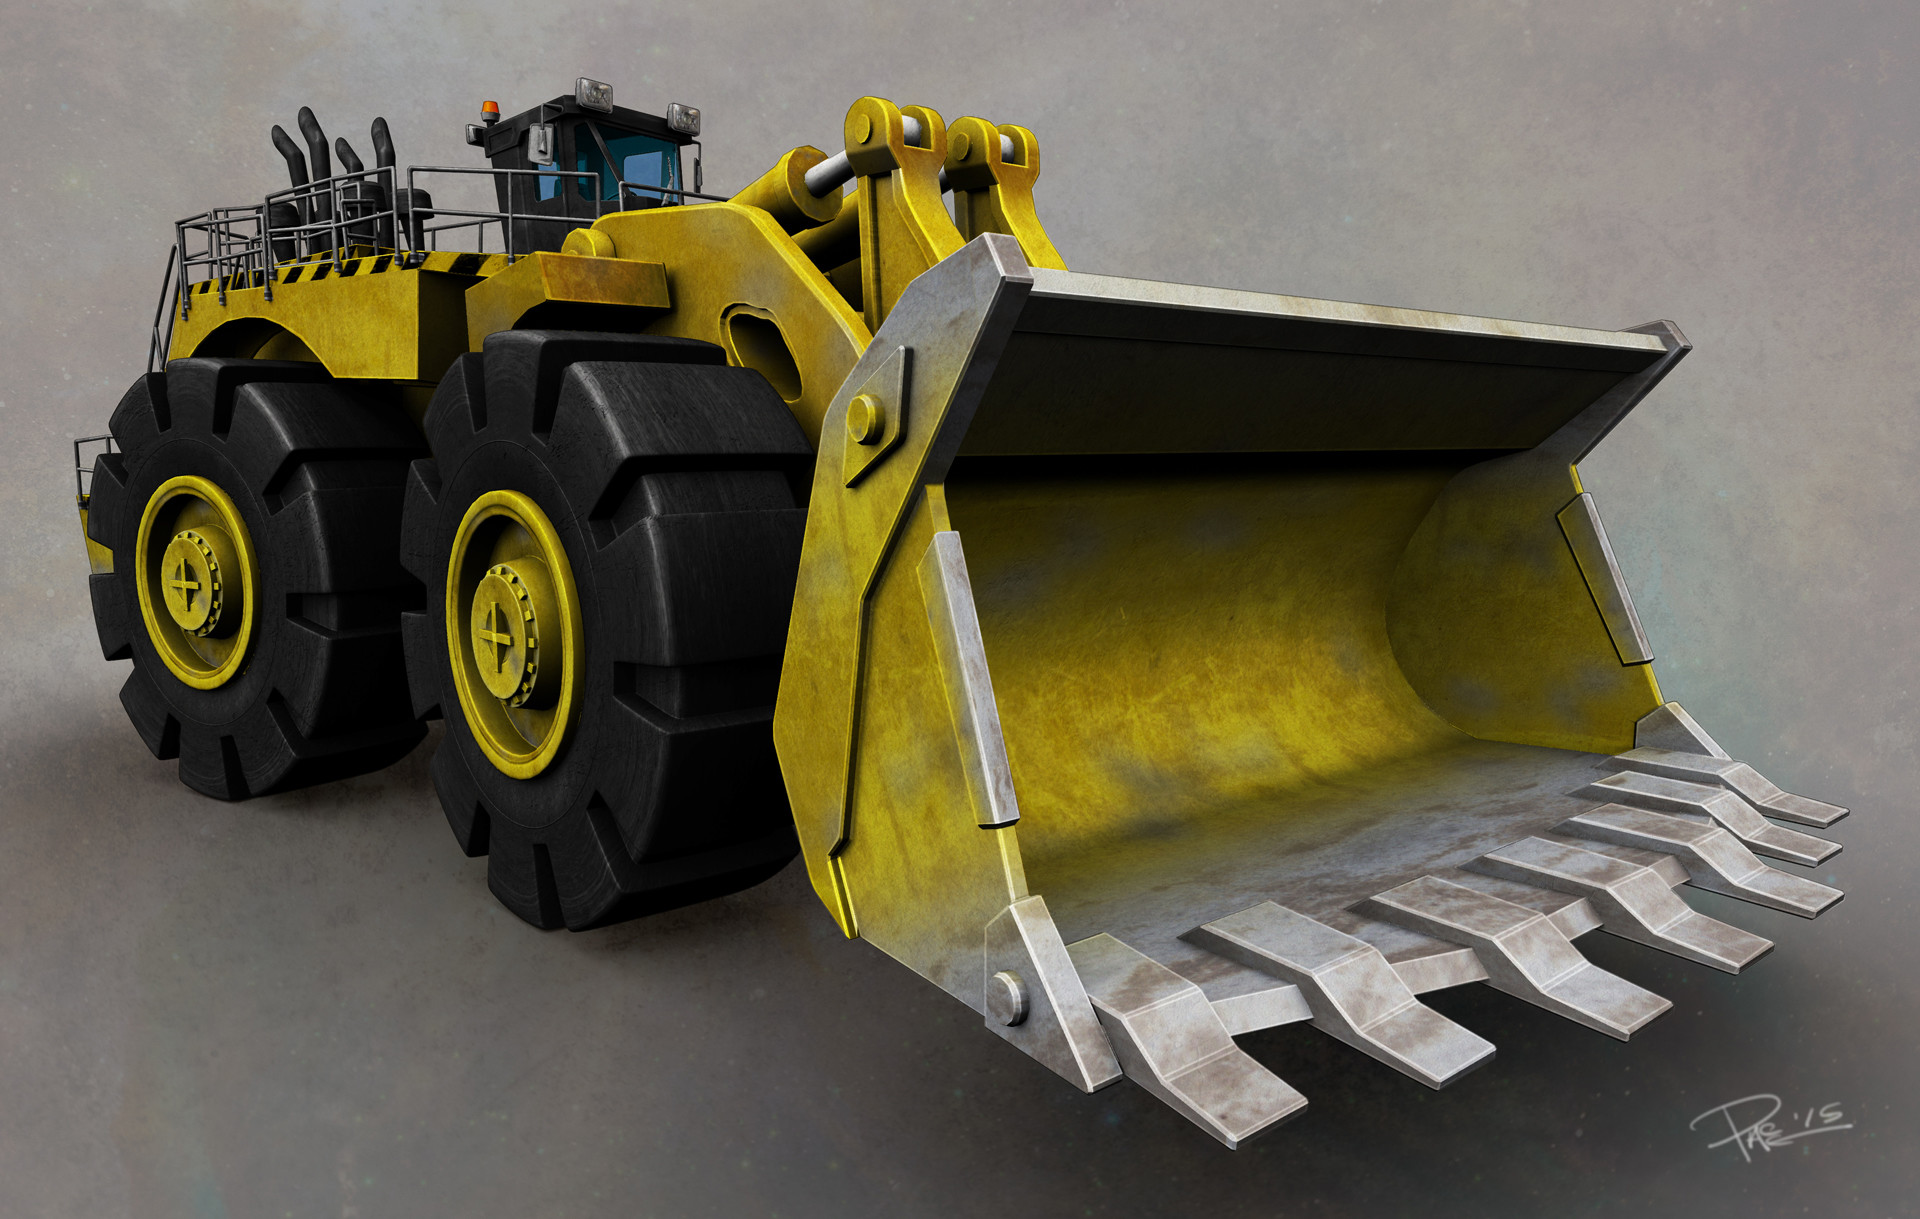 This is an exaggerated Front End Loader. 